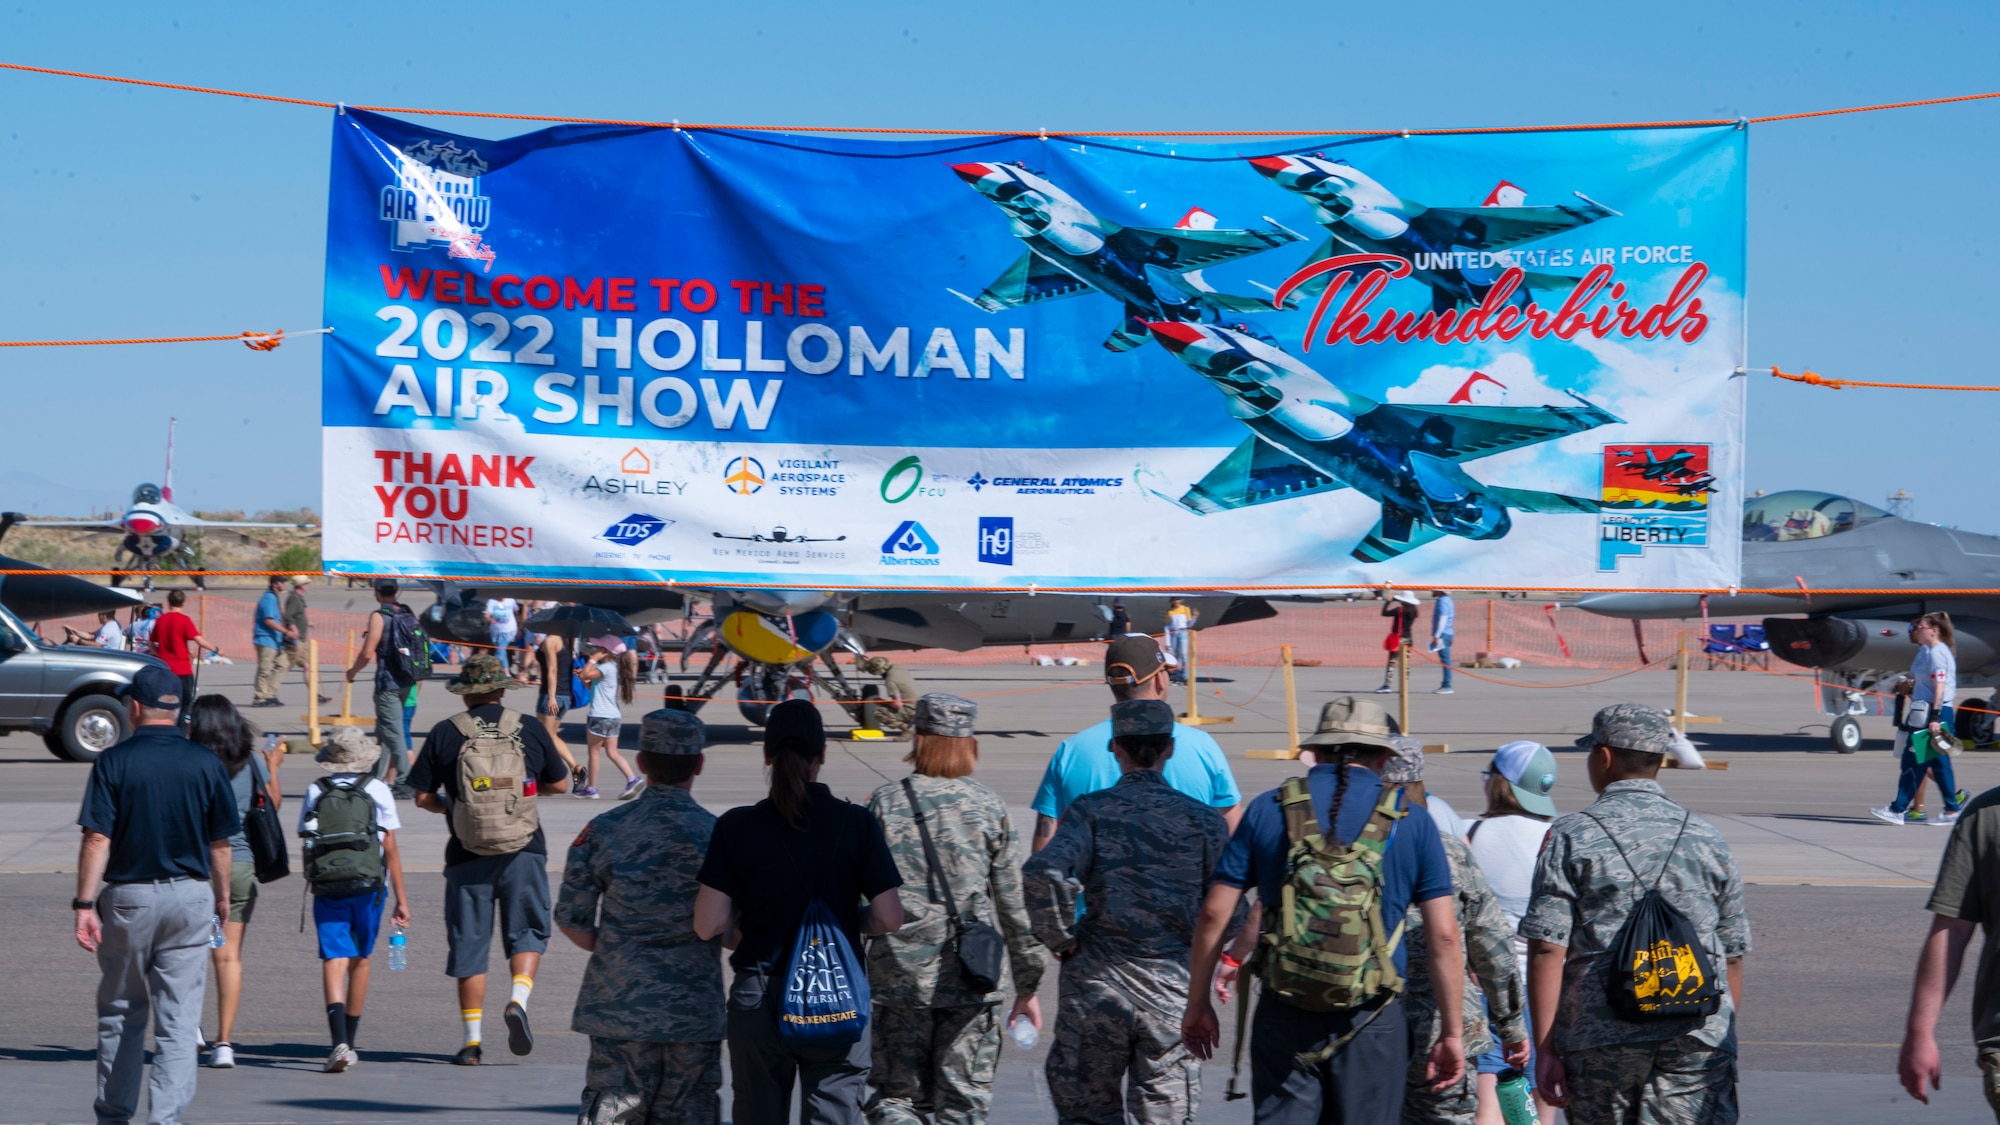 Spectators enter the 2022 Legacy of Liberty Air Show and Open House area May 8, 2022, on Holloman Air Force Base, New Mexico. This air show is the largest event Holloman has hosted in 11 years. (U.S. Air Force photo by Airman 1st Class Nicholas Paczkowski)